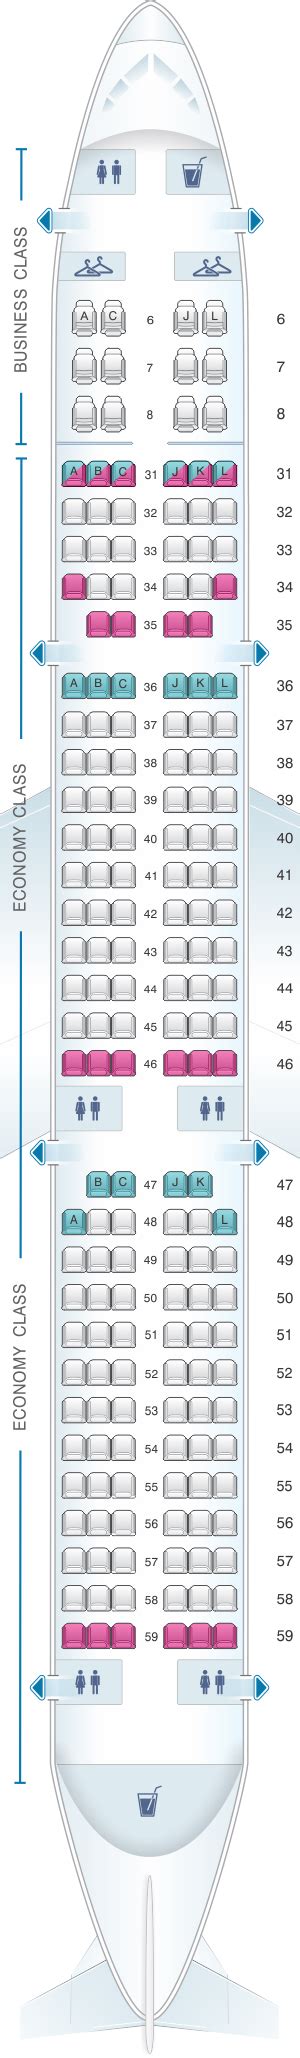 Seat Map China Eastern Airlines Airbus A321 200 182pax Seatmaestro